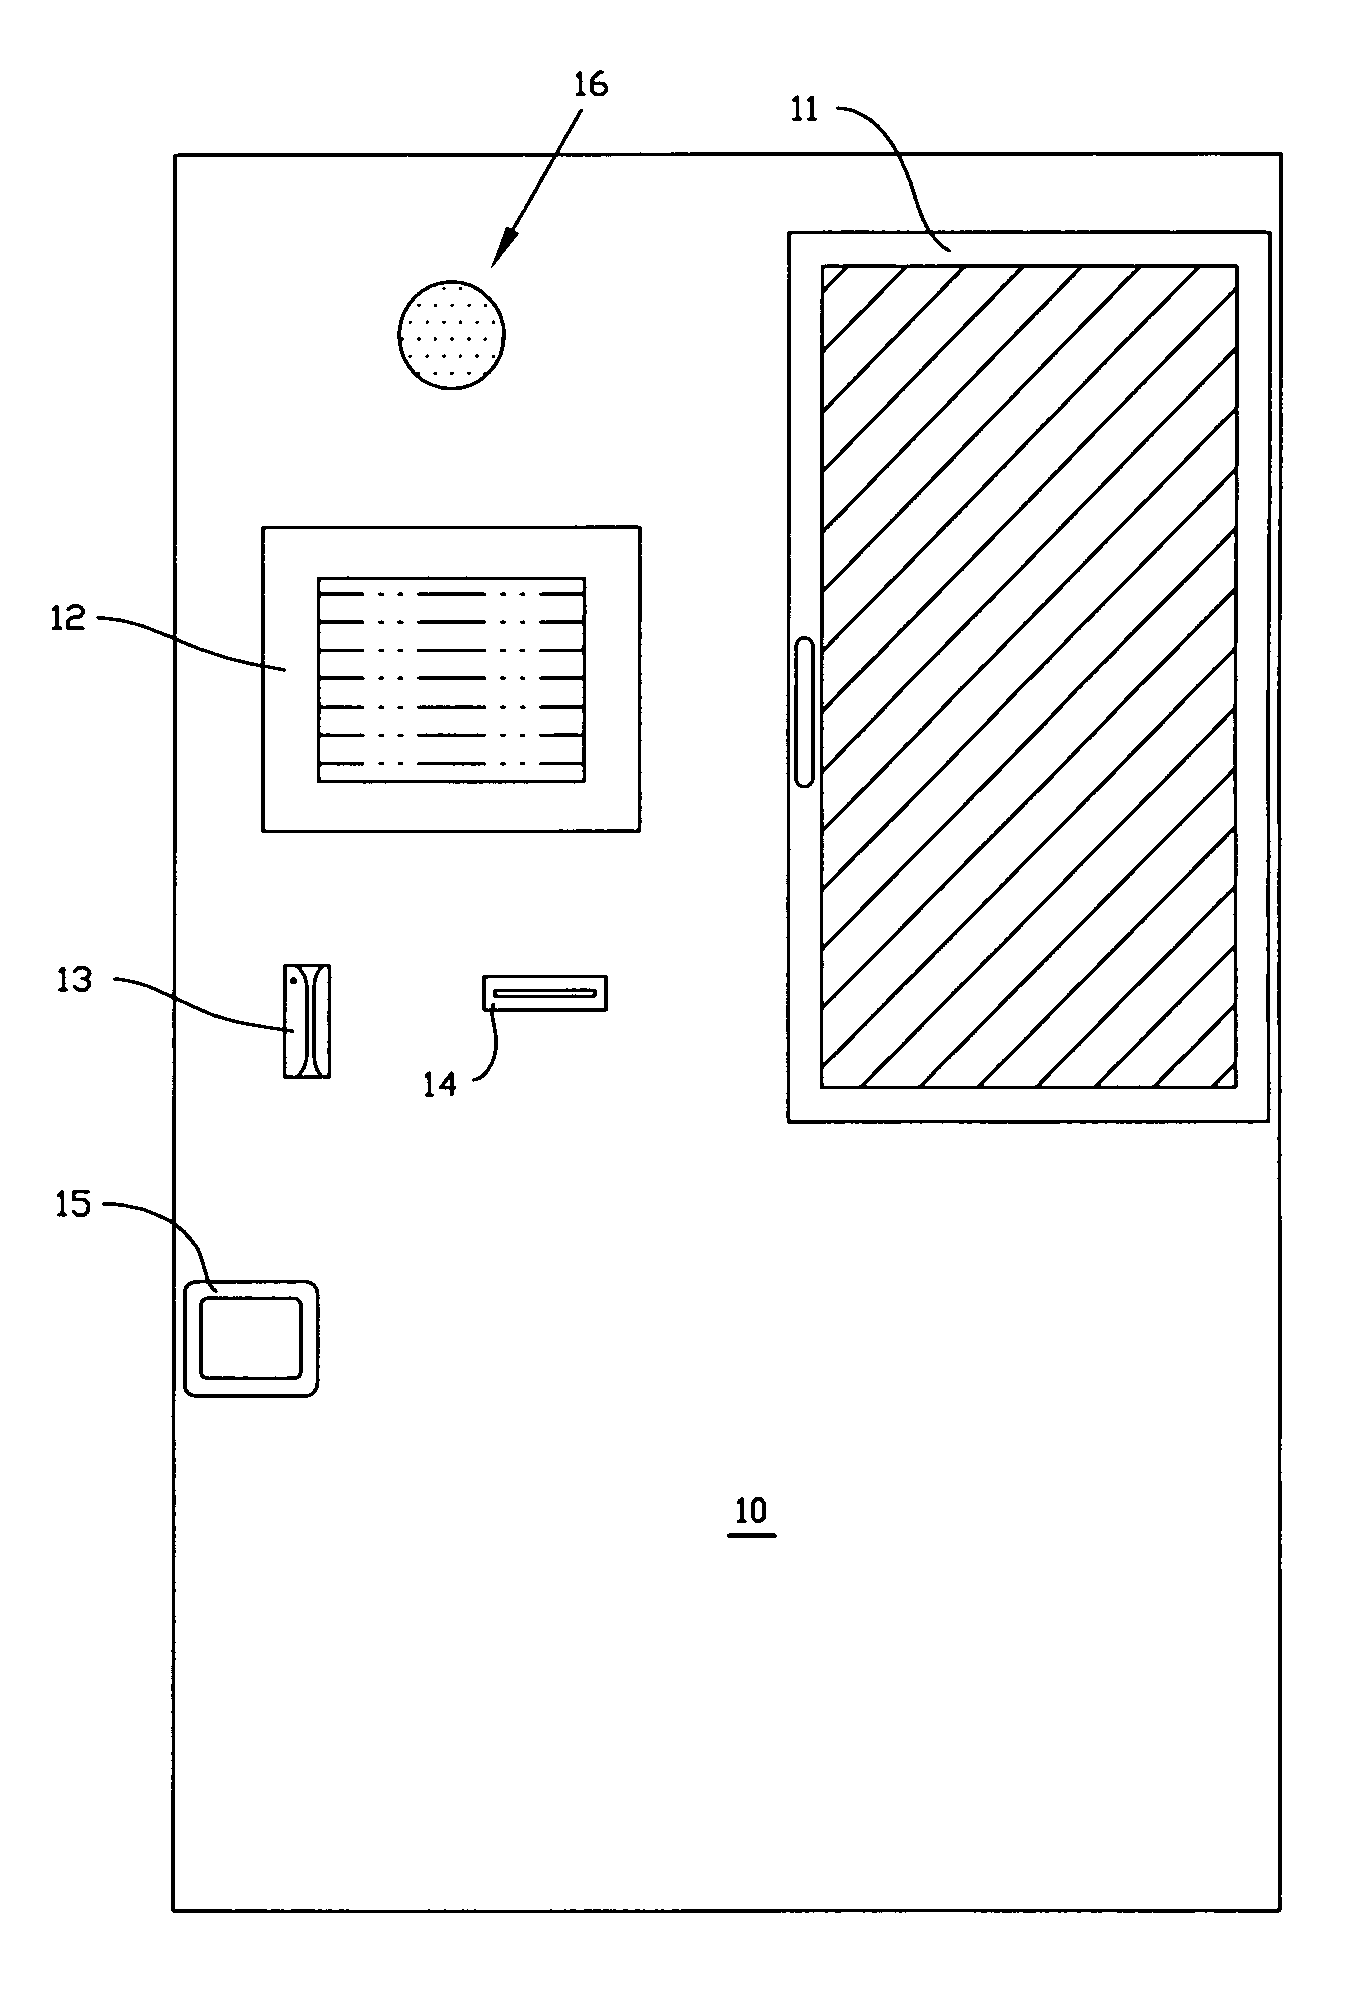 Automated dry cleaning delivery system